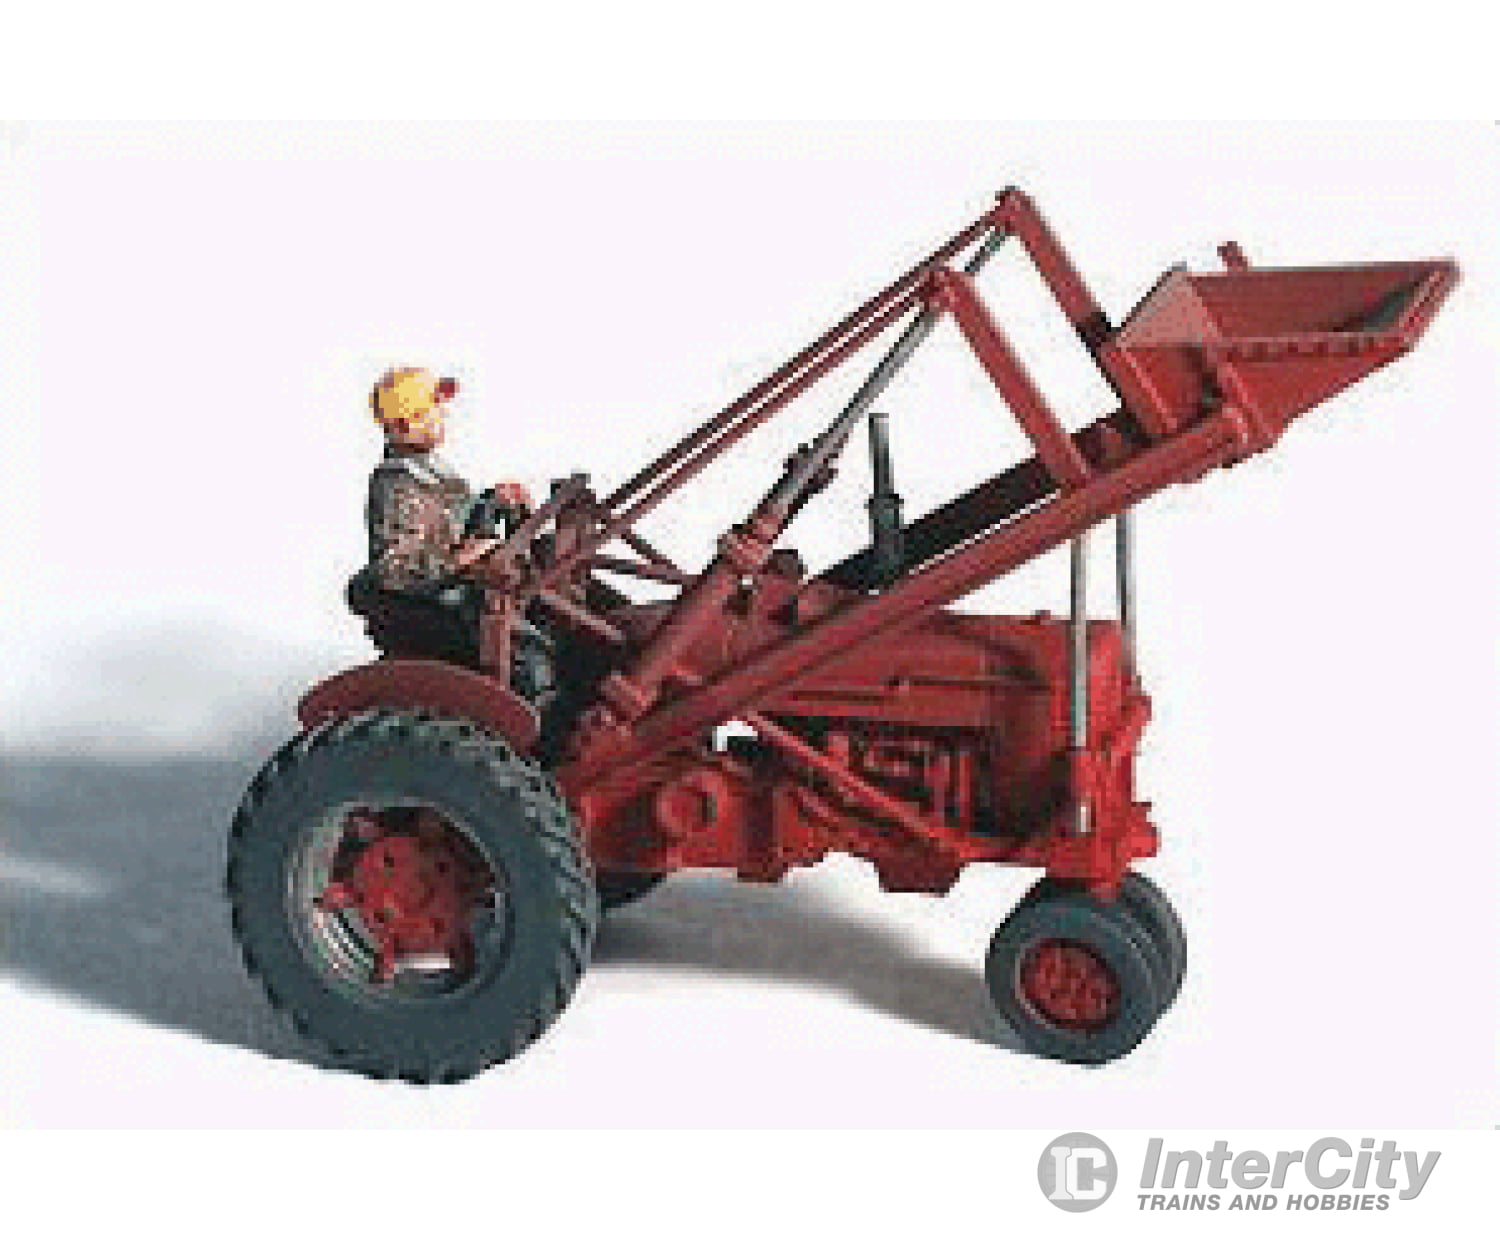 Ghq Ho 60005 Farm Machinery (Unpainted Metal Kit) -- 1953 Red Tractor With Front Loader (Includes